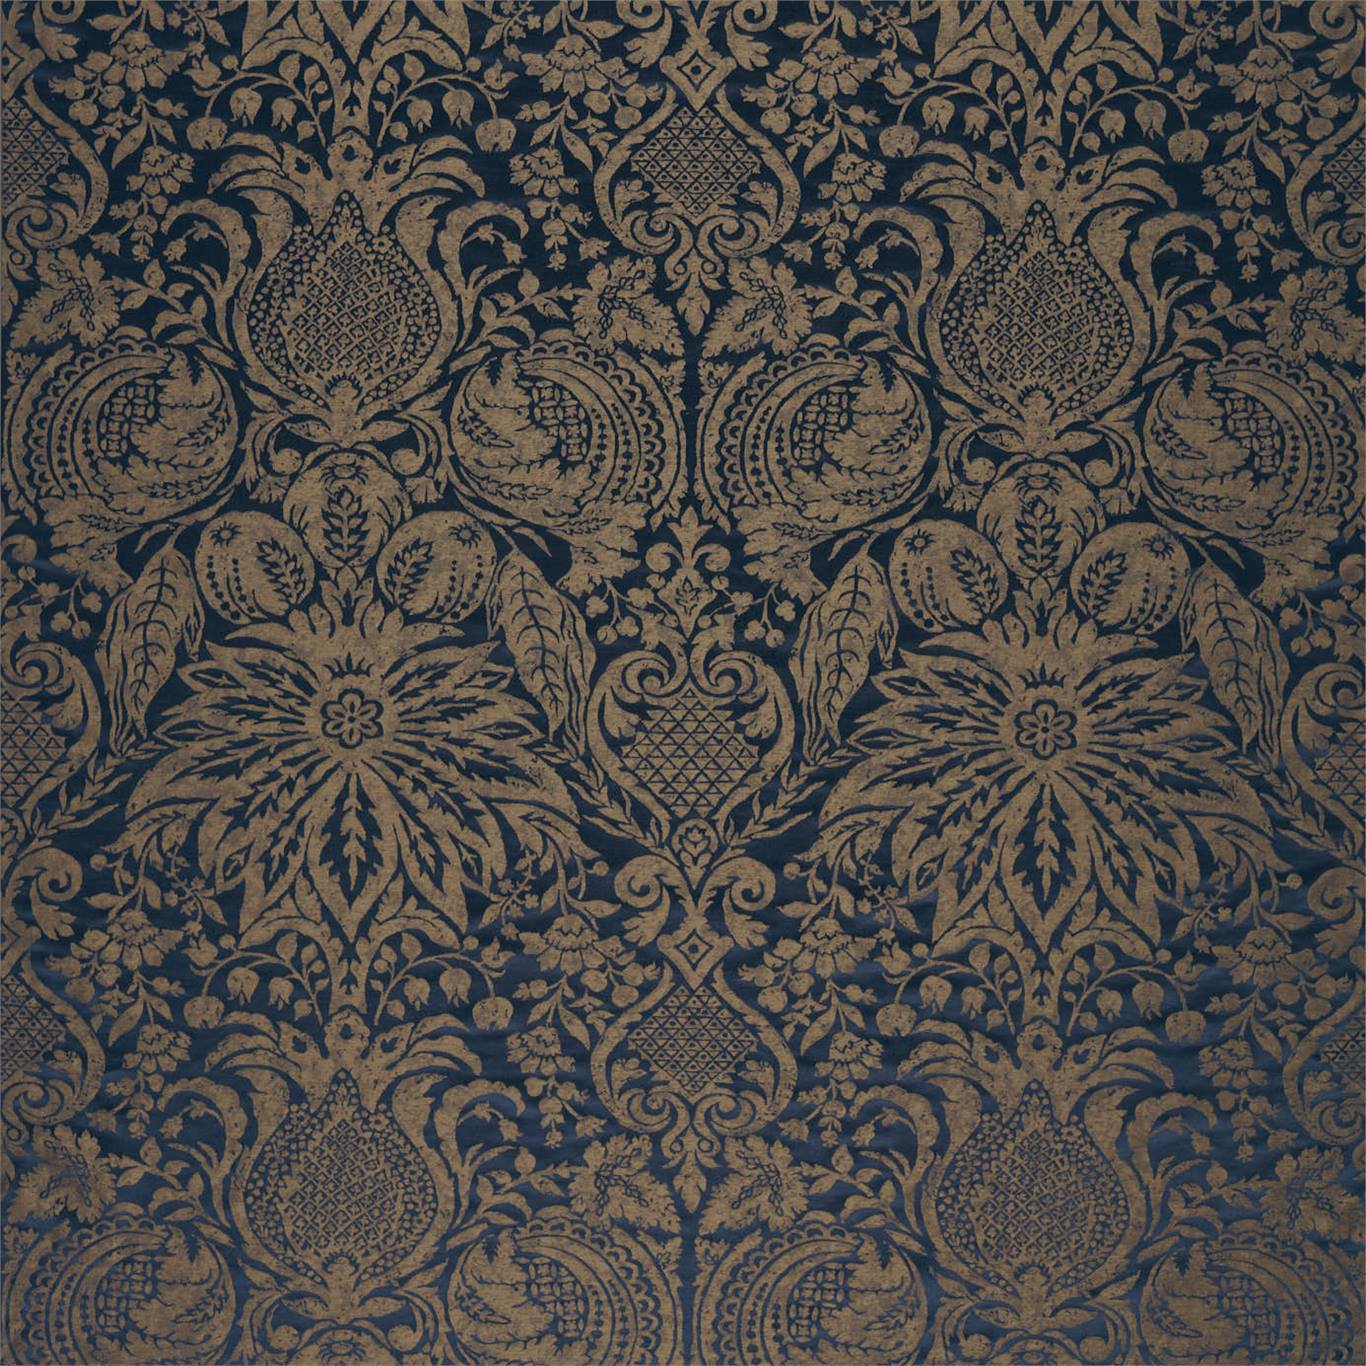 Mitford Weave Prussian Copper Fabric by ZOF